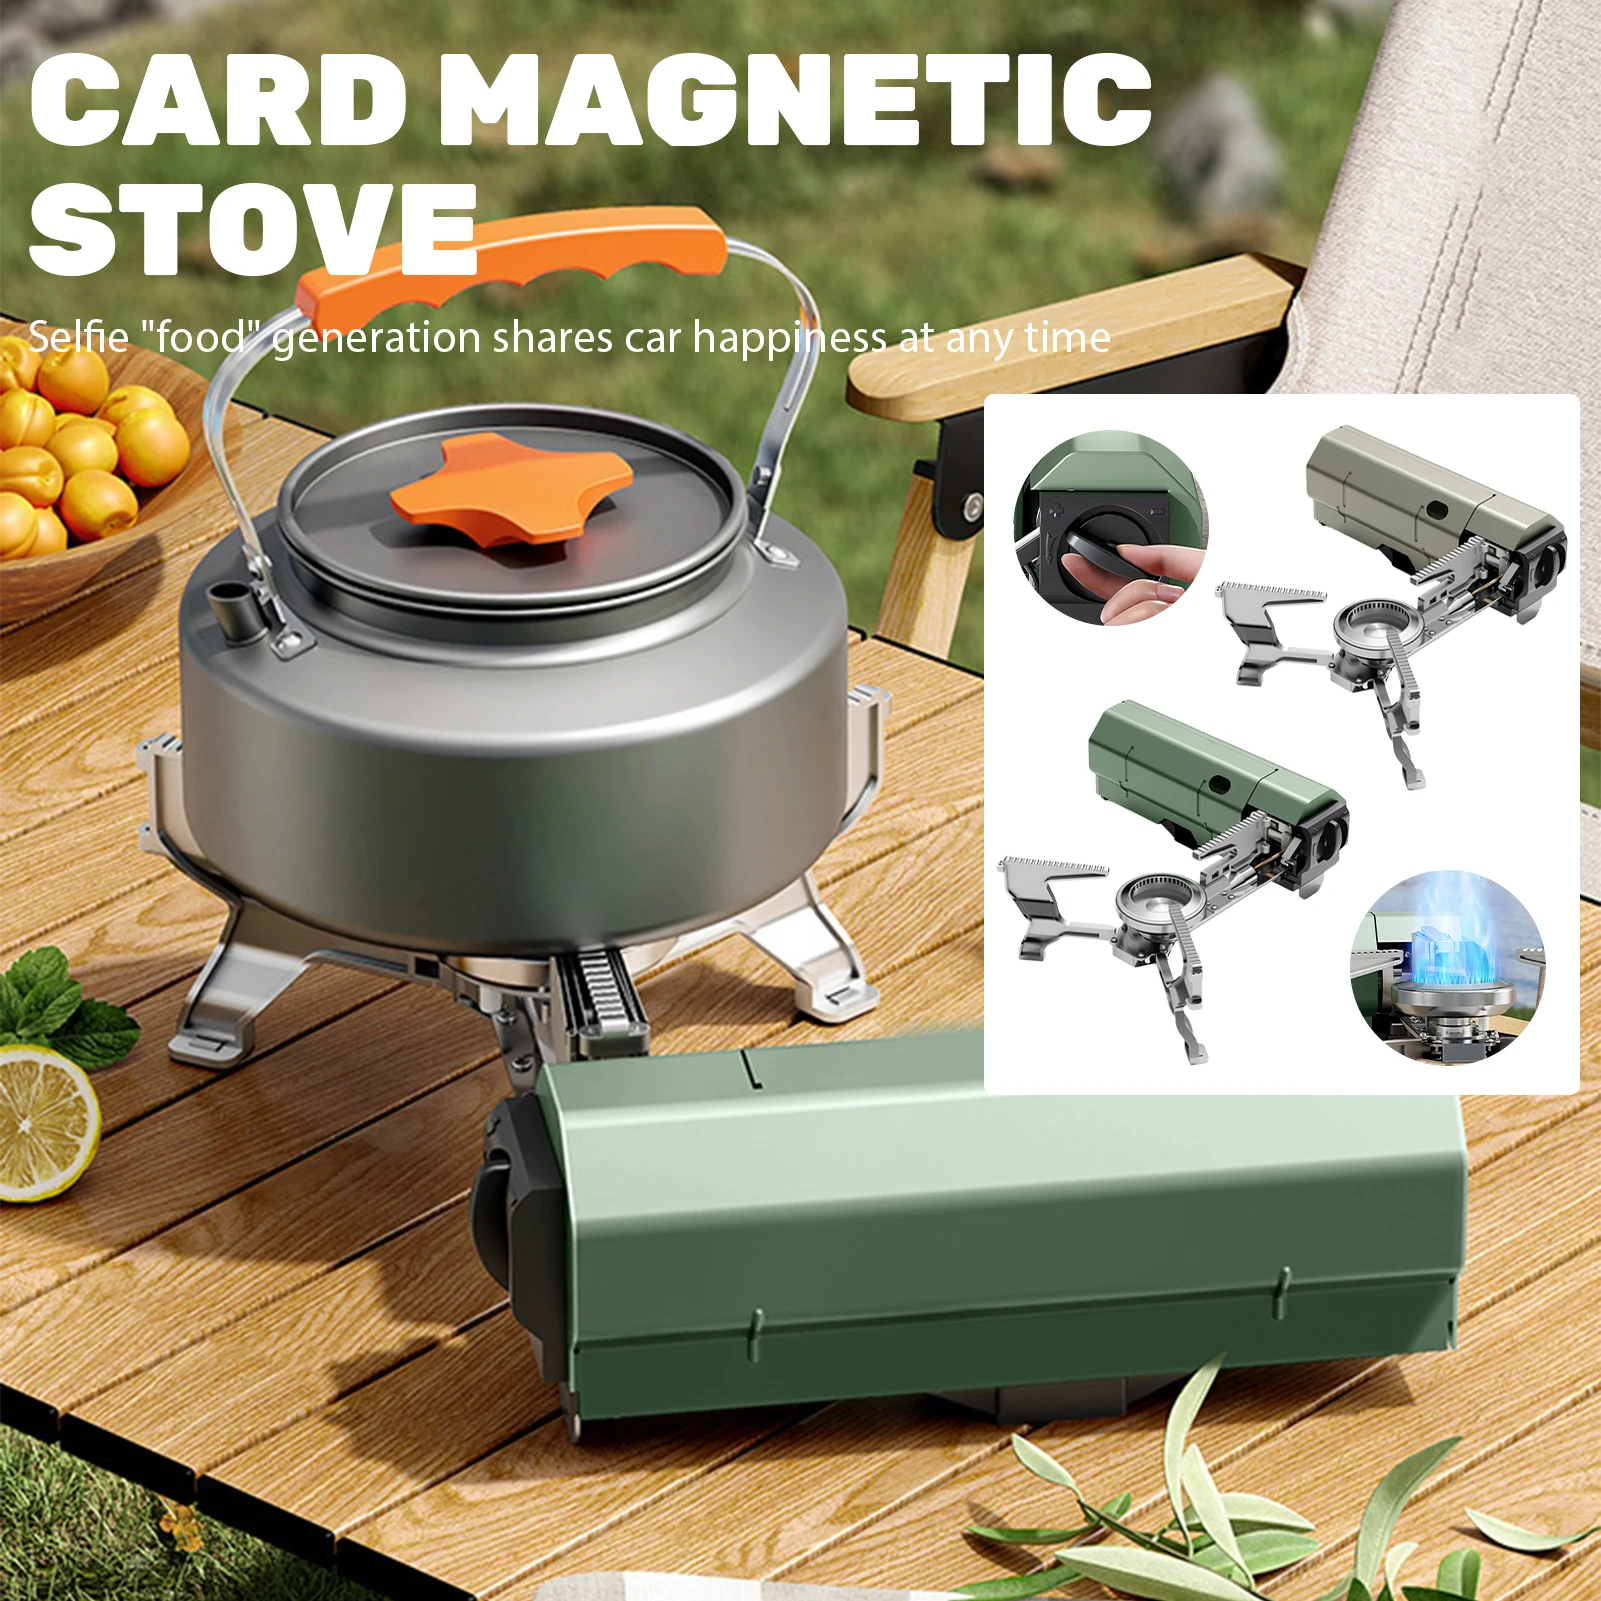 

Multipurpose Outdoor Cassette Stove Durable Windproof Picnic Stove Outdoor Supplies